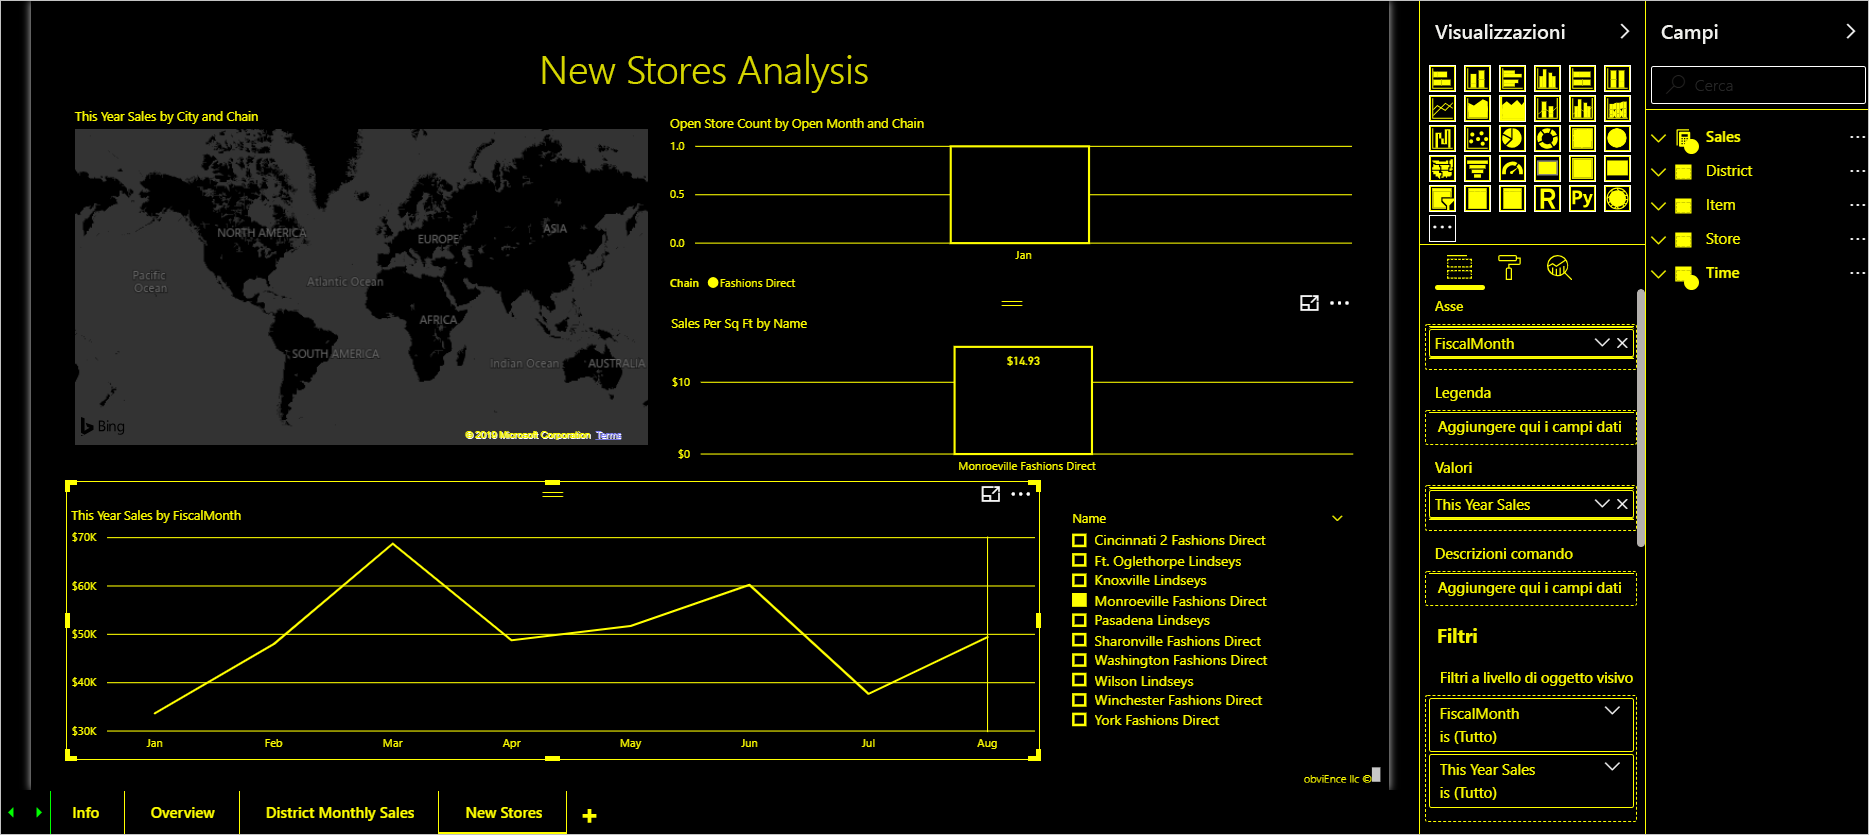 High-contrast color setting in Power BI service showing yellow text and visuals on a black background.